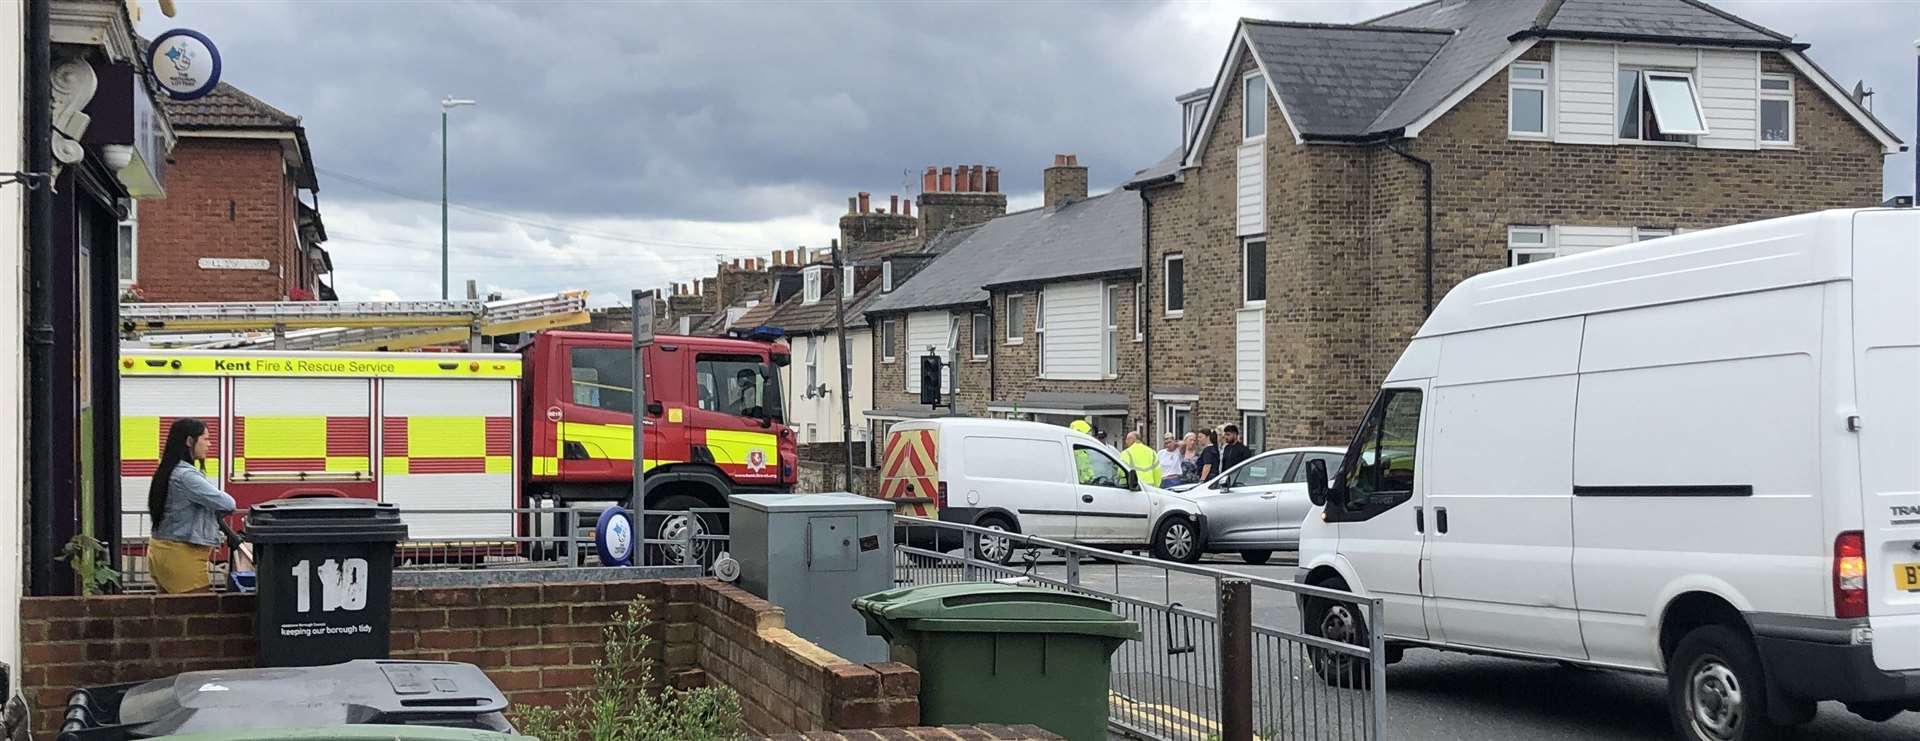 Kent Fire and Rescue Service are at the scene of a collision in Maidstone